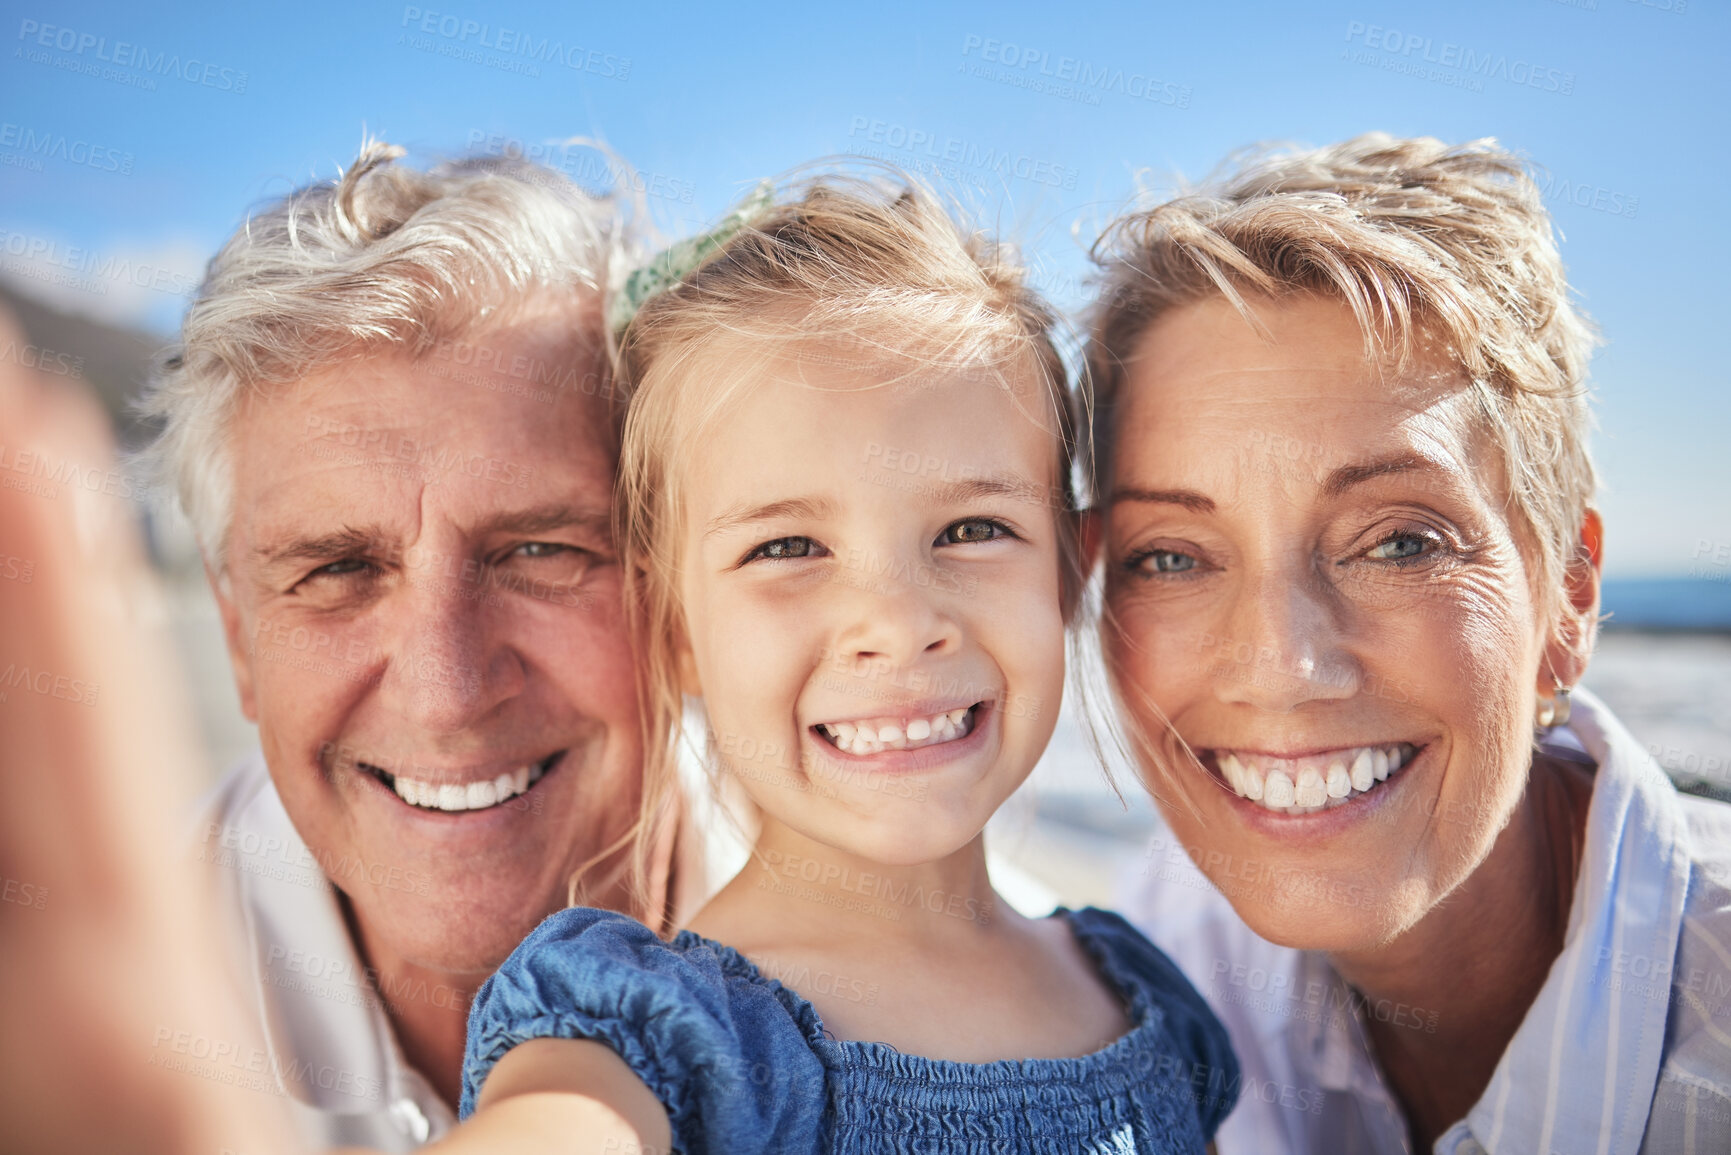 Buy stock photo Close up of little caucasian girl smiling while holding mobile phone and taking a selfie with her grandparents. Happy senior grandmother and grandfather posing for a photo with their granddaughter outdoors on a sunny day